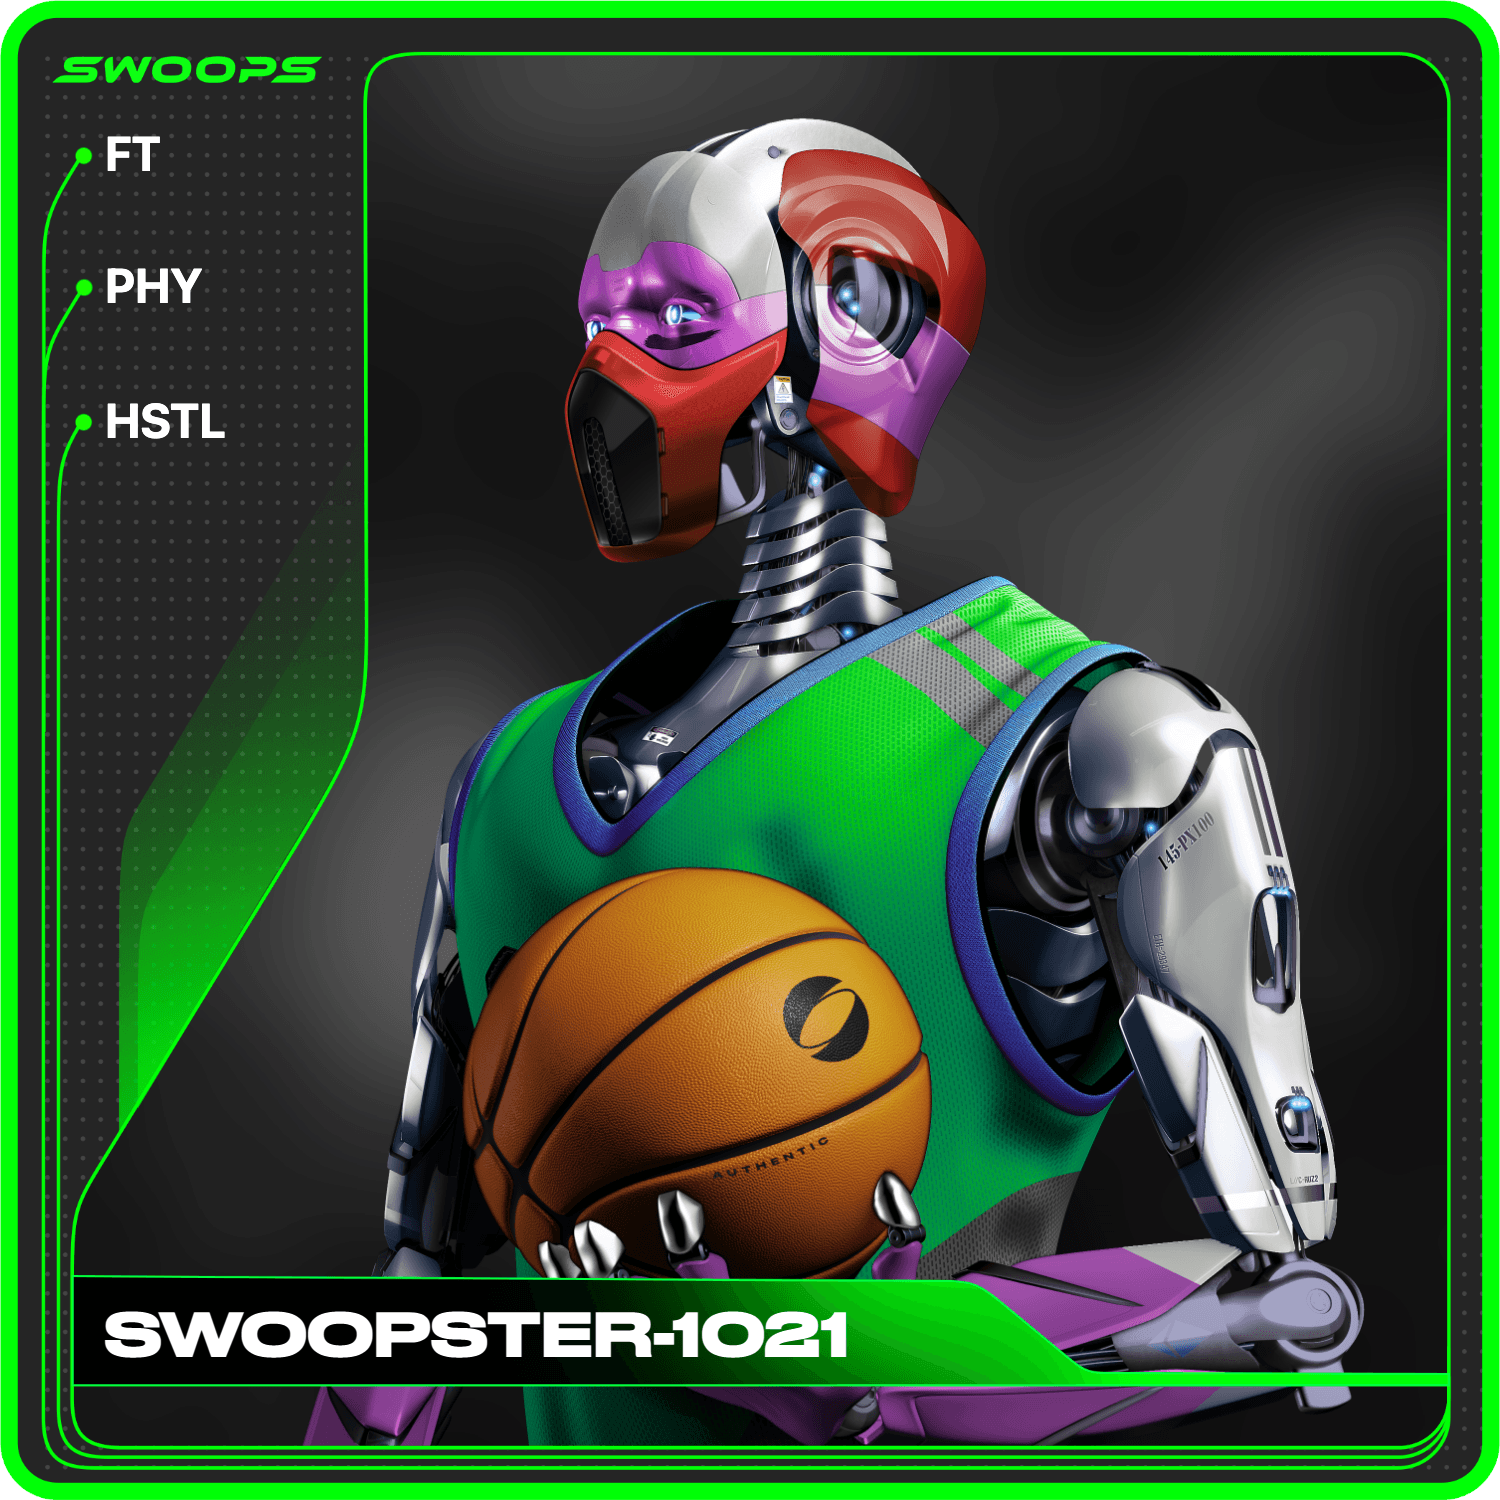 SWOOPSTER-1021